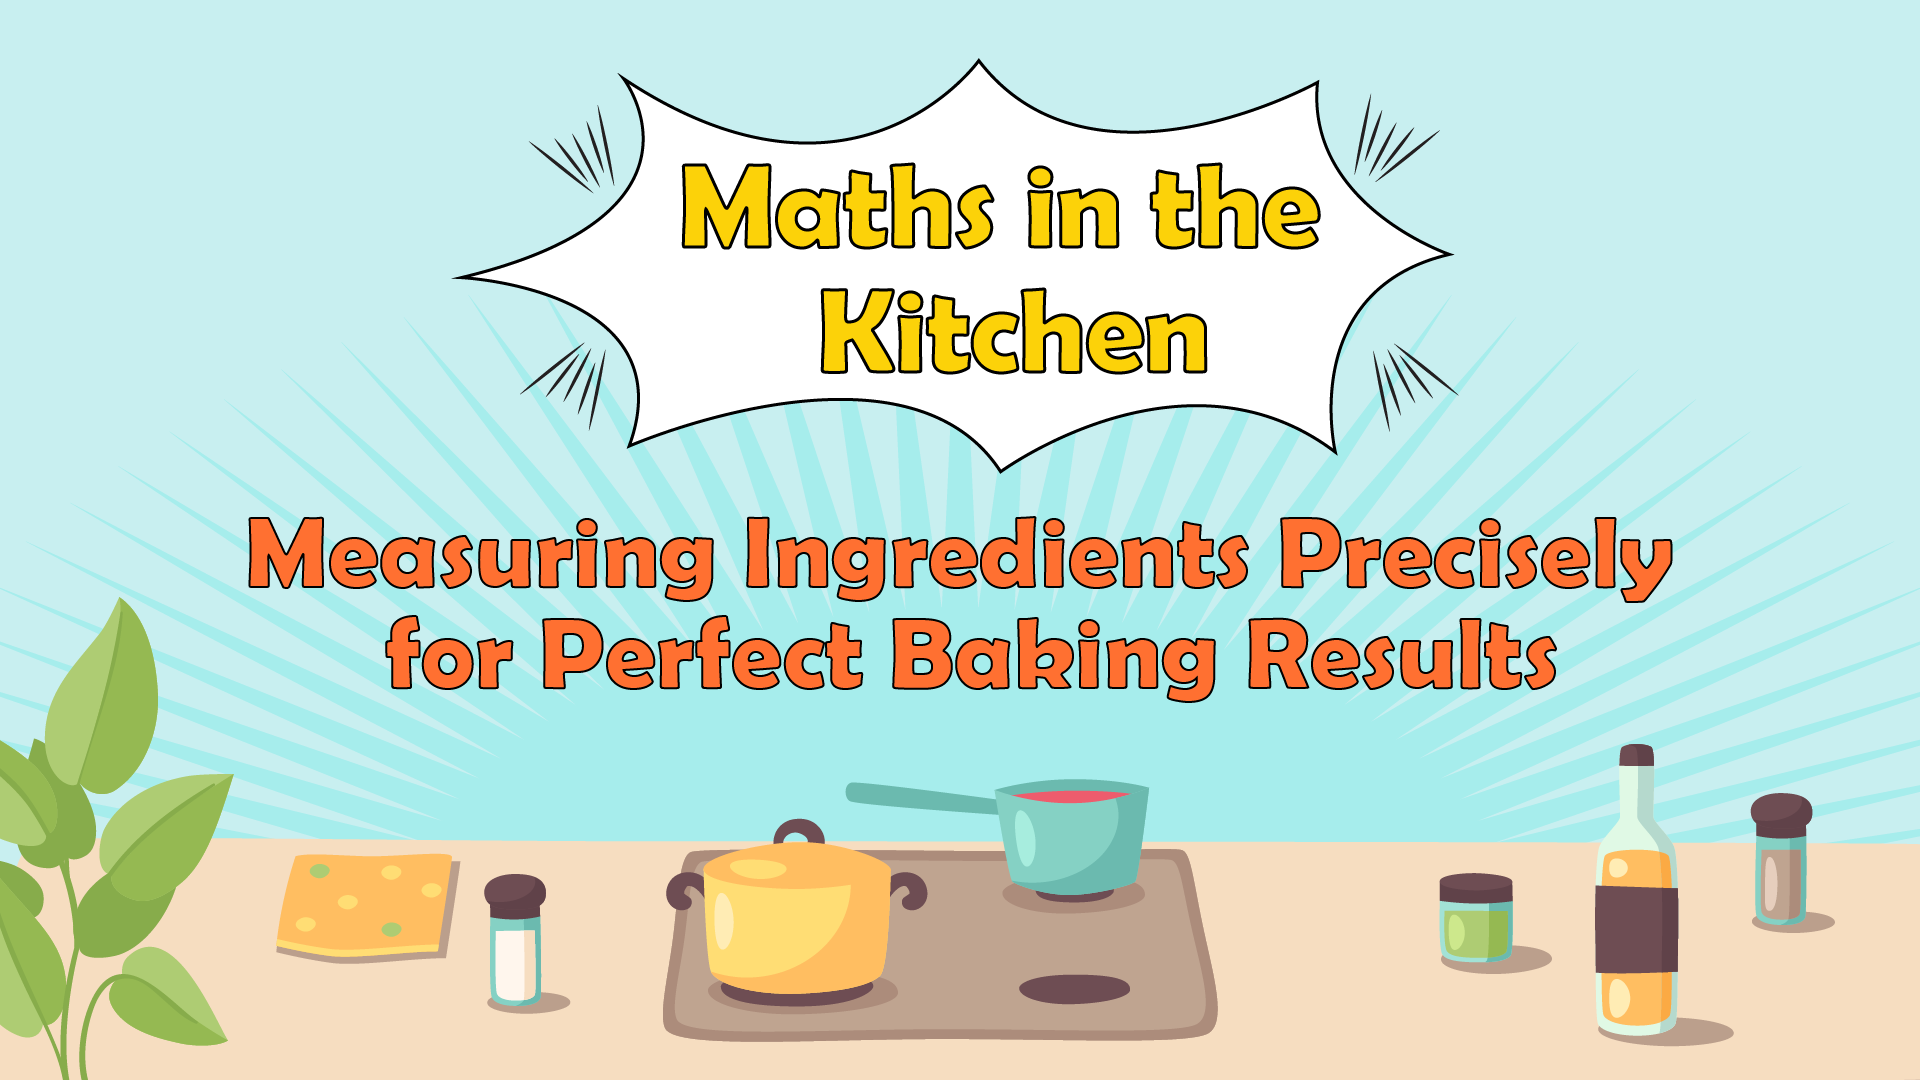 Maths in the Kitchen: Measuring Ingredients Precisely for Perfect Baking Results